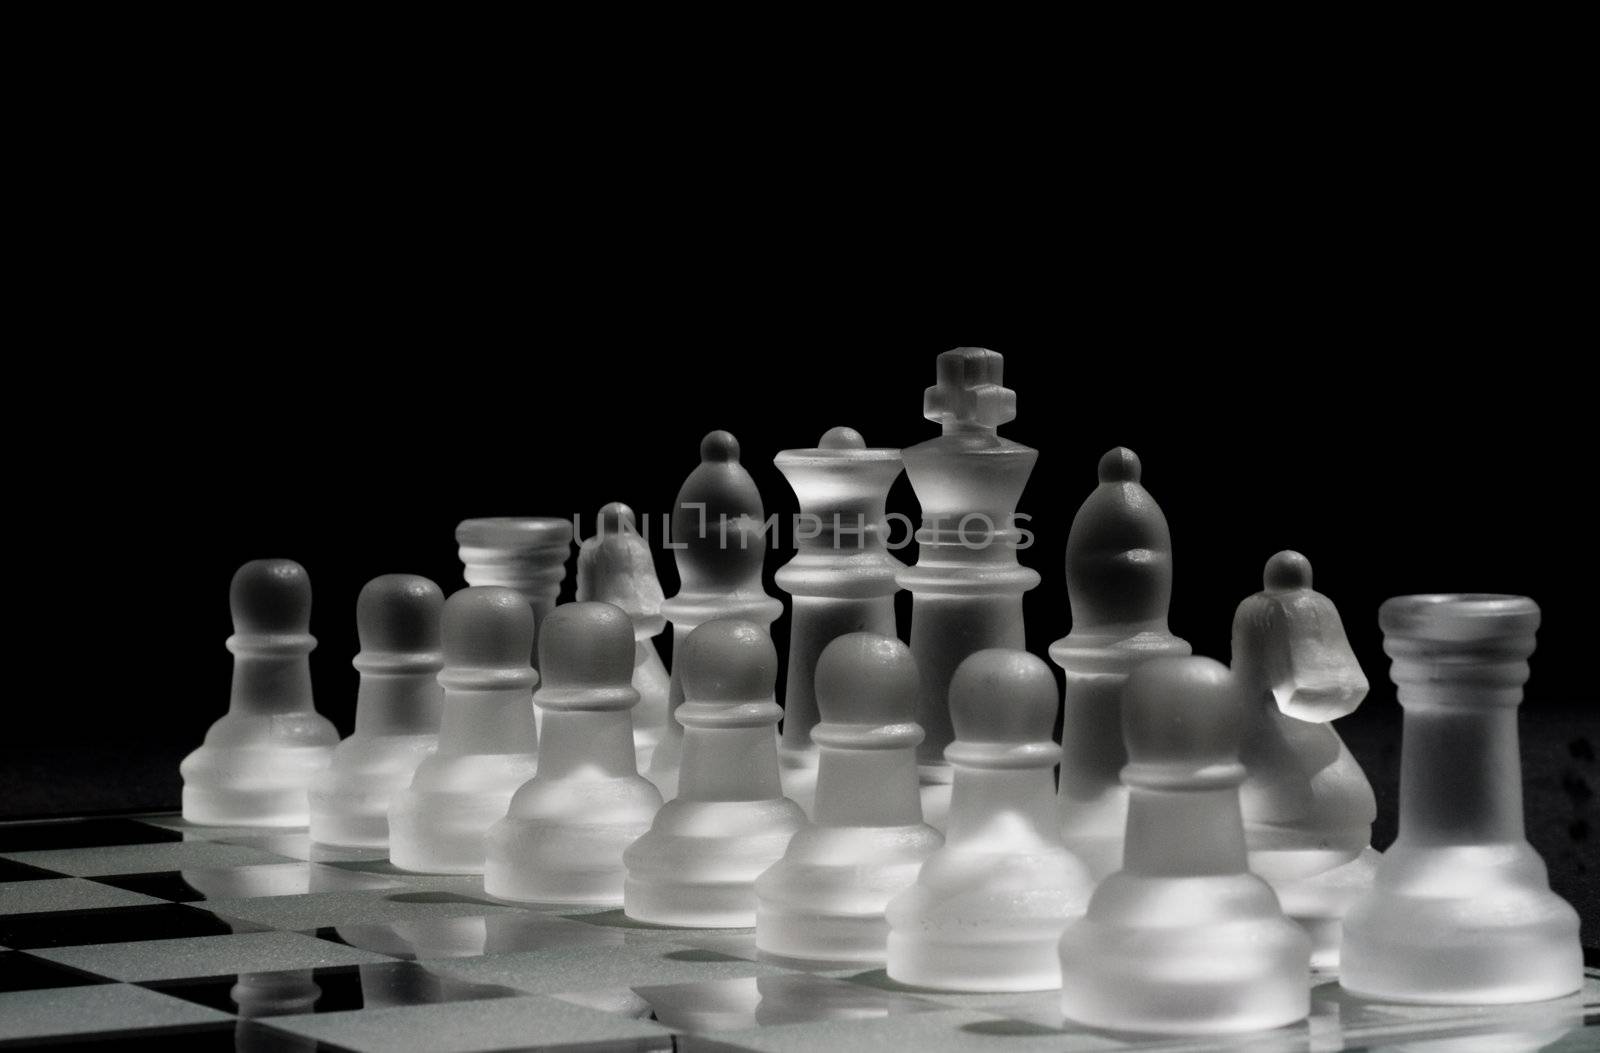 One side is ready for a chess battle